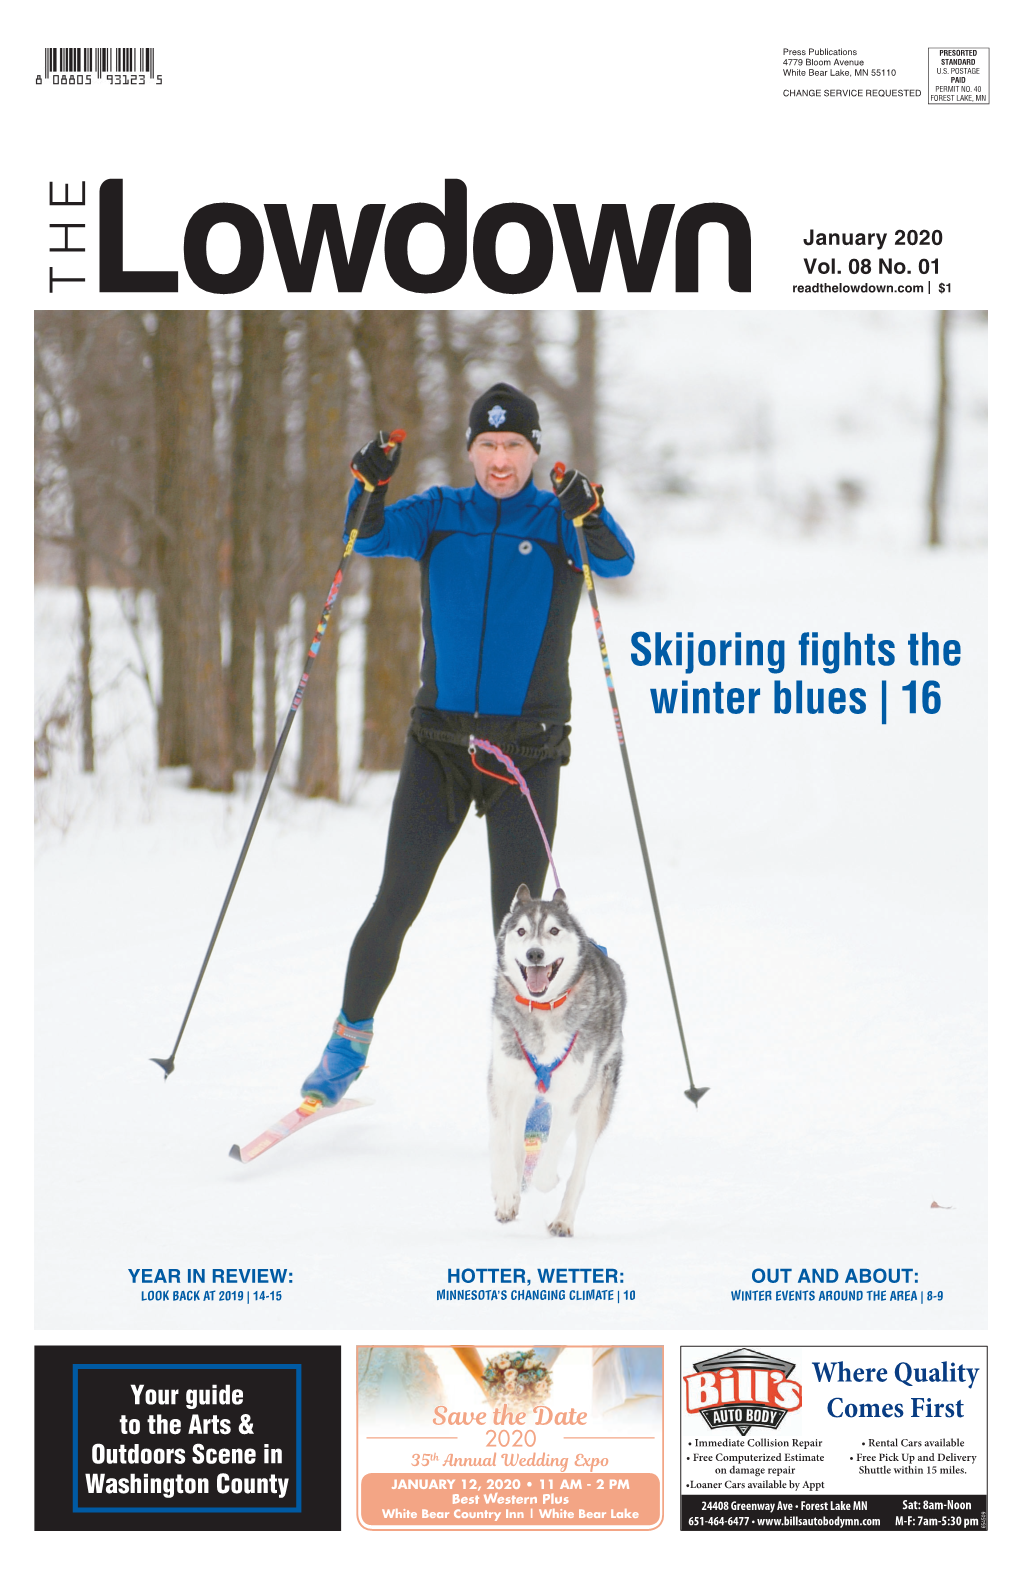 Skijoring Fights the Winter Blues